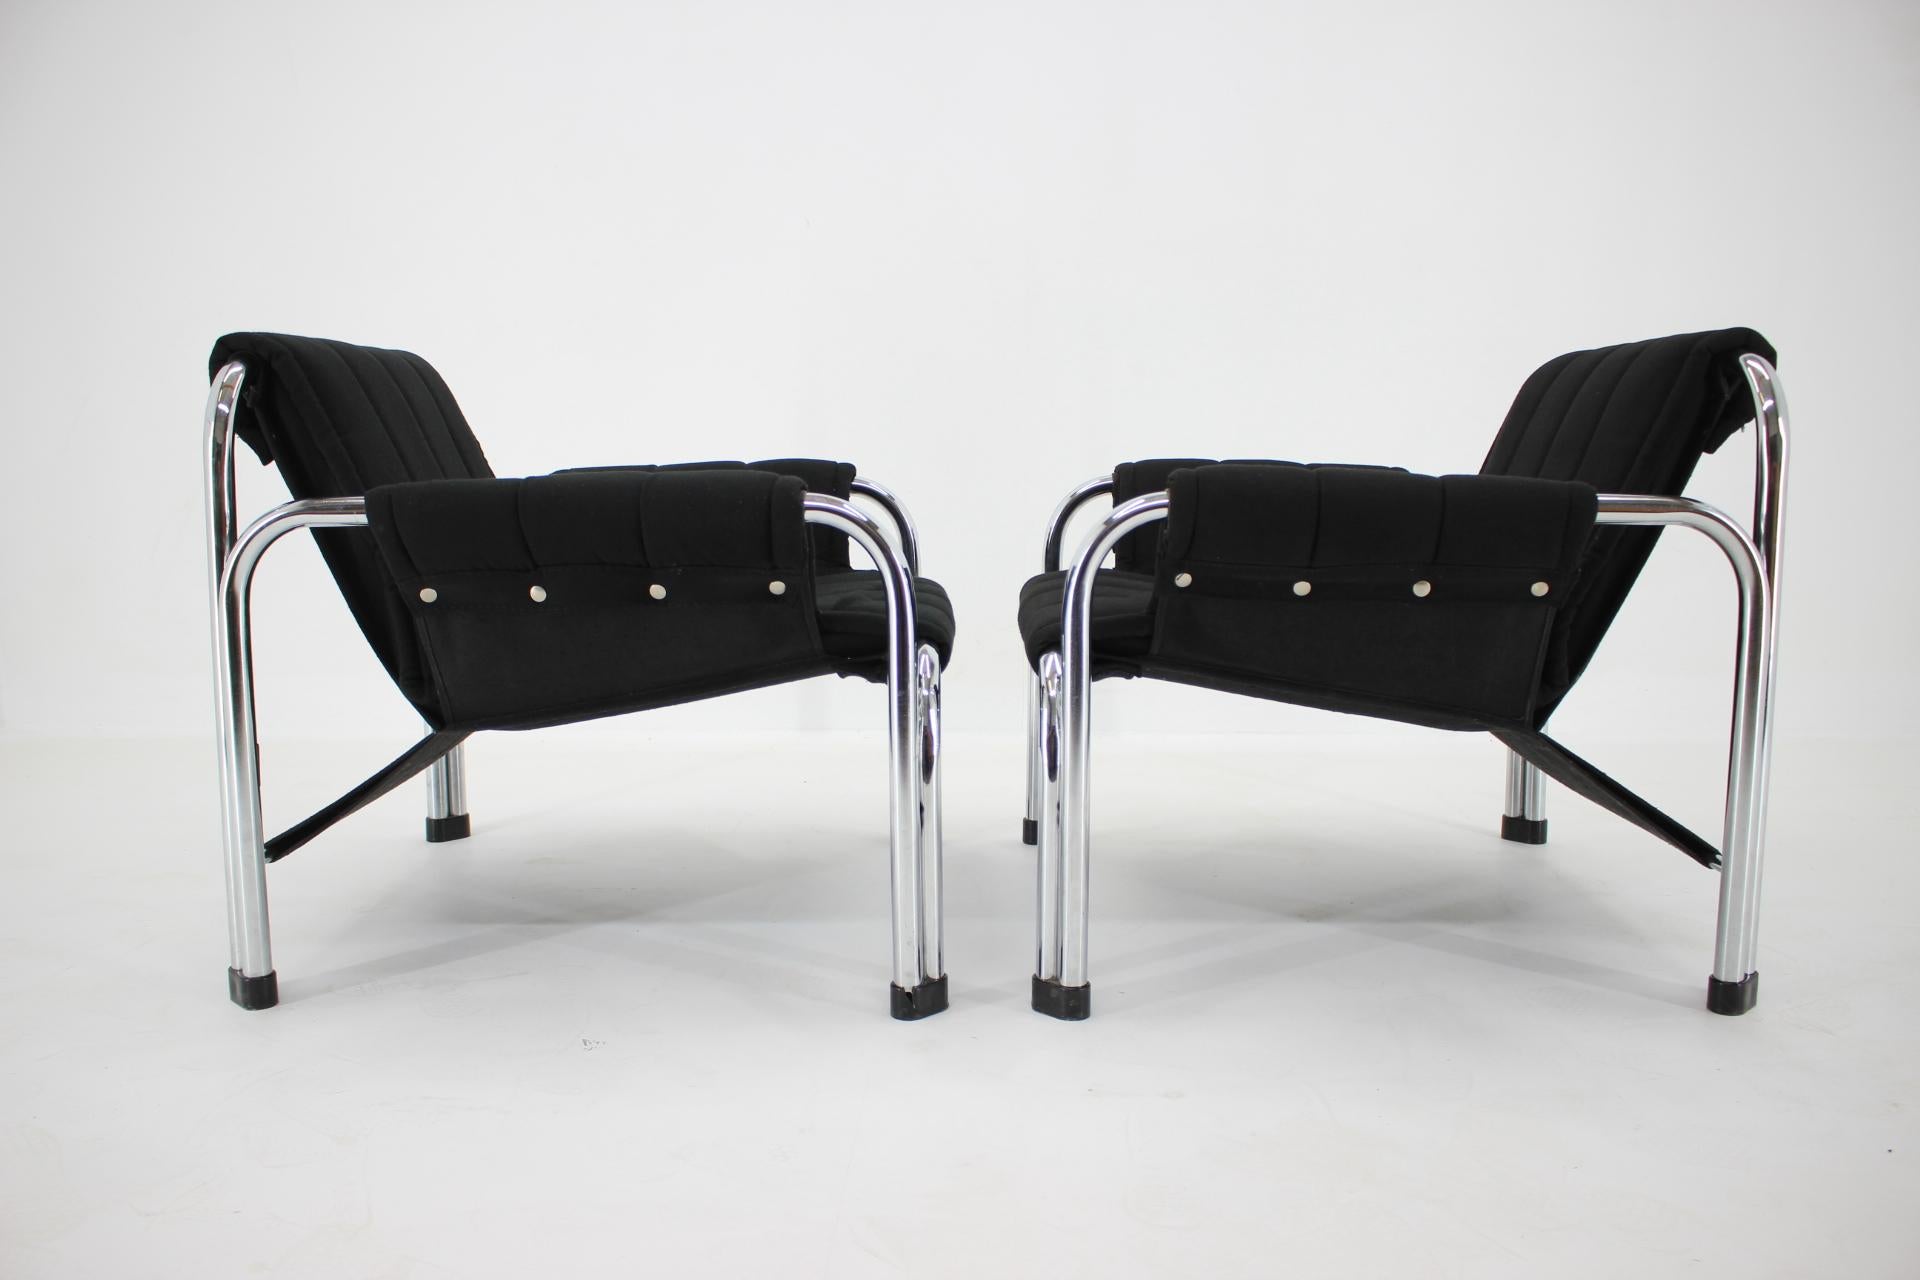 Pair of Design Chrome Armchairs by Viliam Chlebo, Czechoslovakia/up to 16 pieces In Good Condition For Sale In Praha, CZ